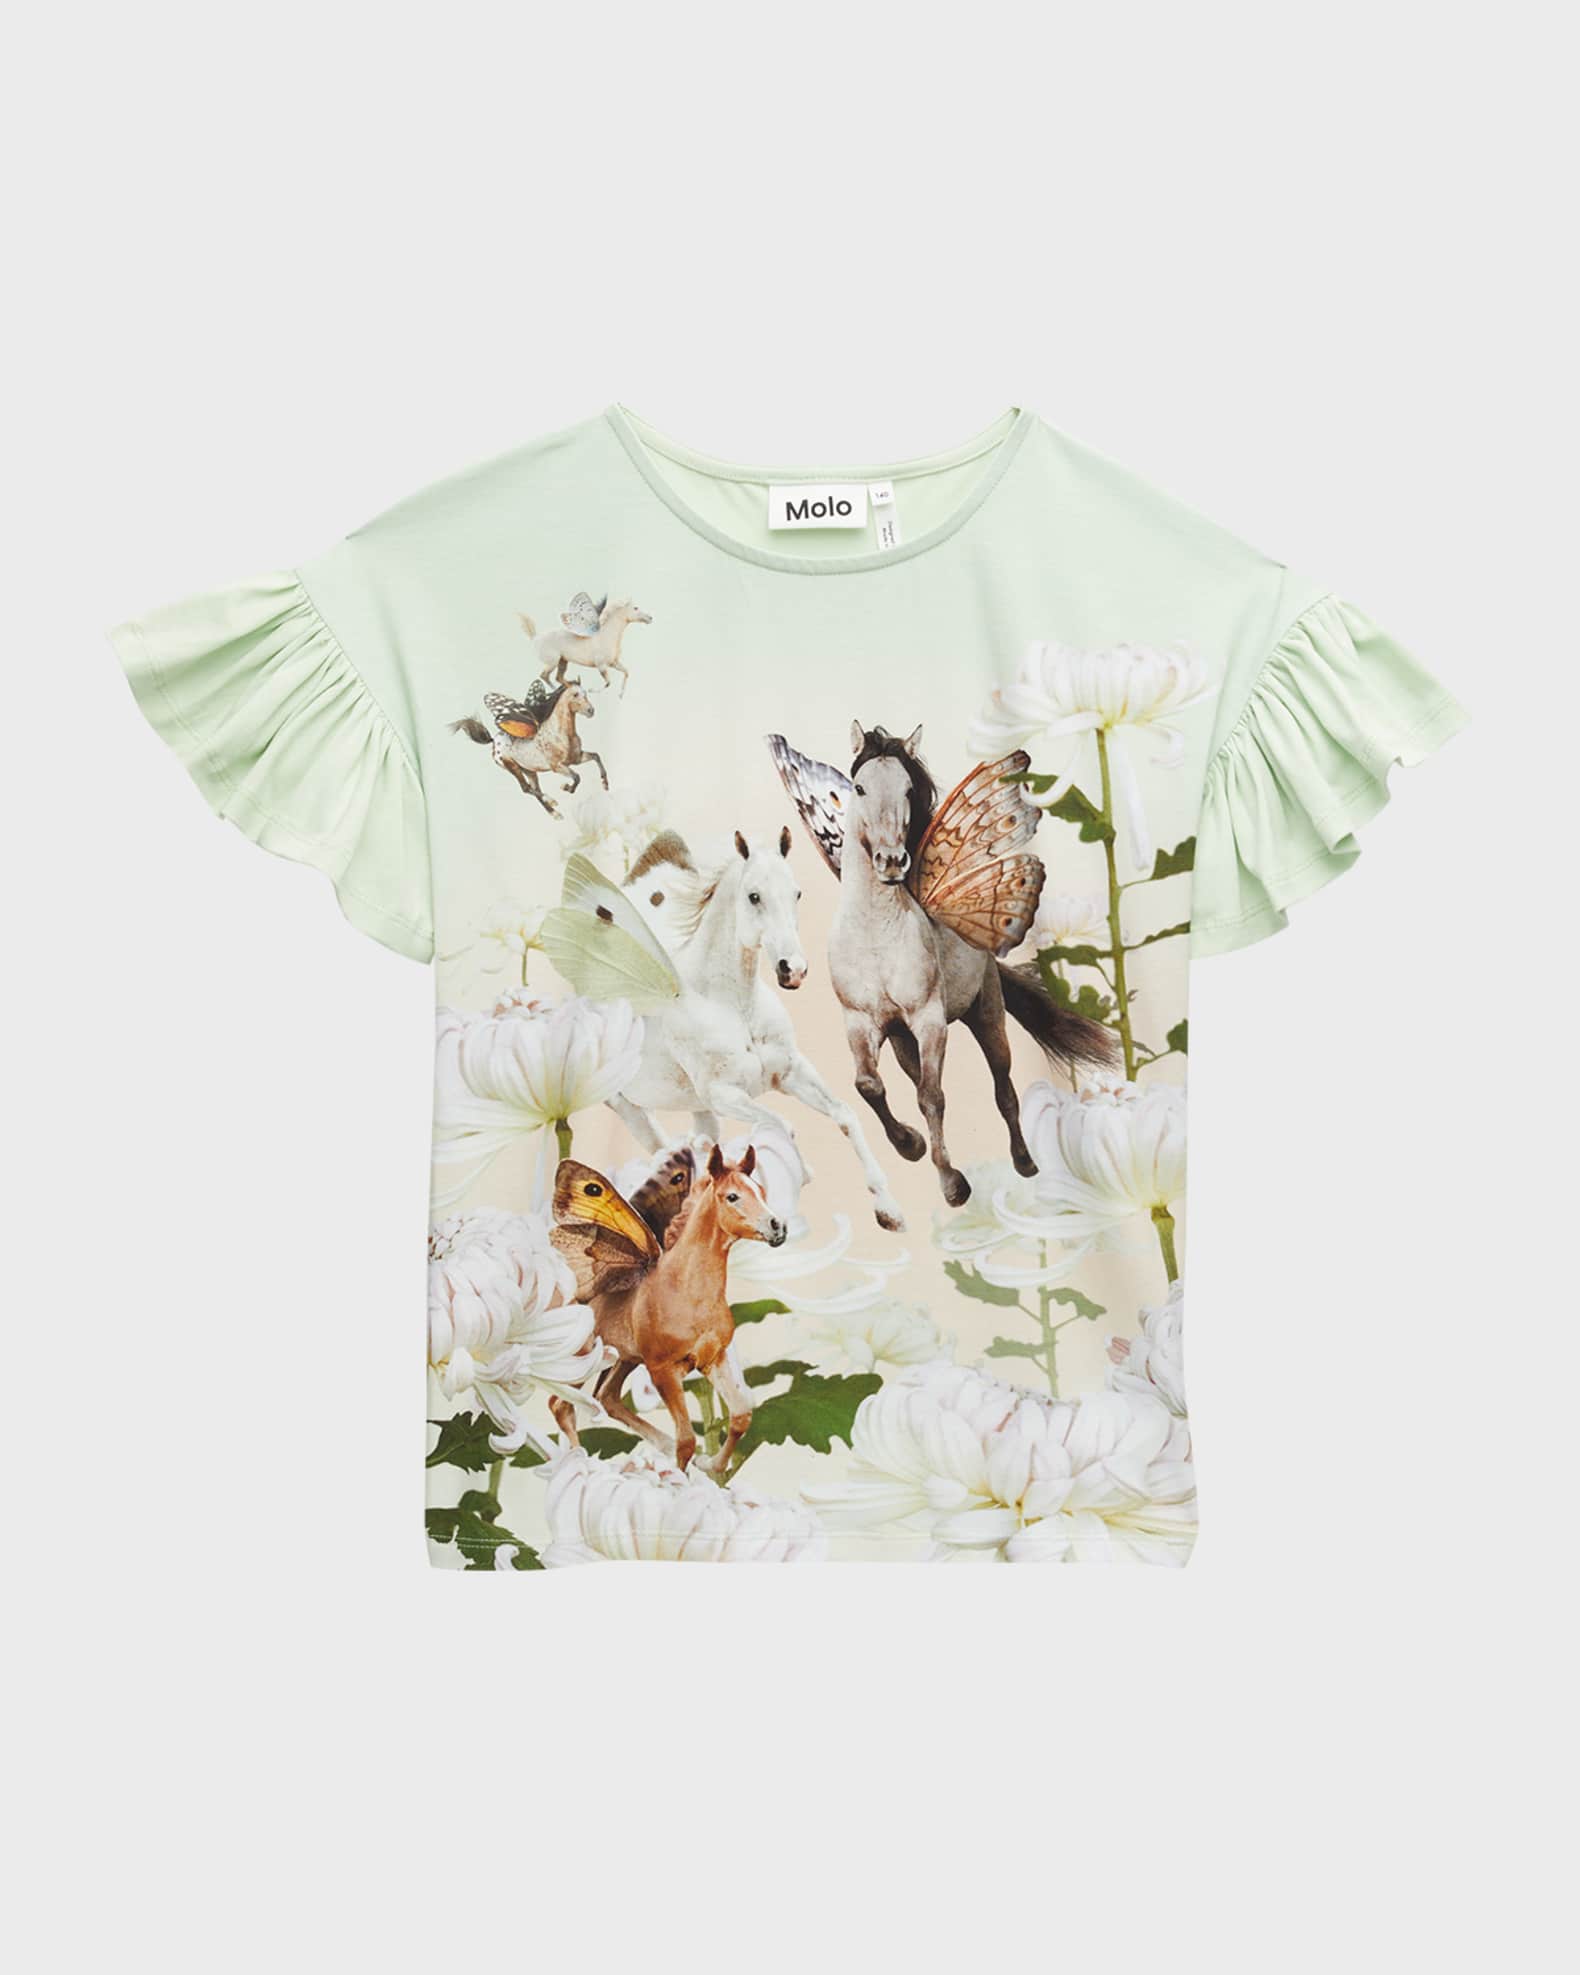 Molo Girl's Rayah Winged Horses Graphic T-Shirt, Size 8-10 | Neiman Marcus